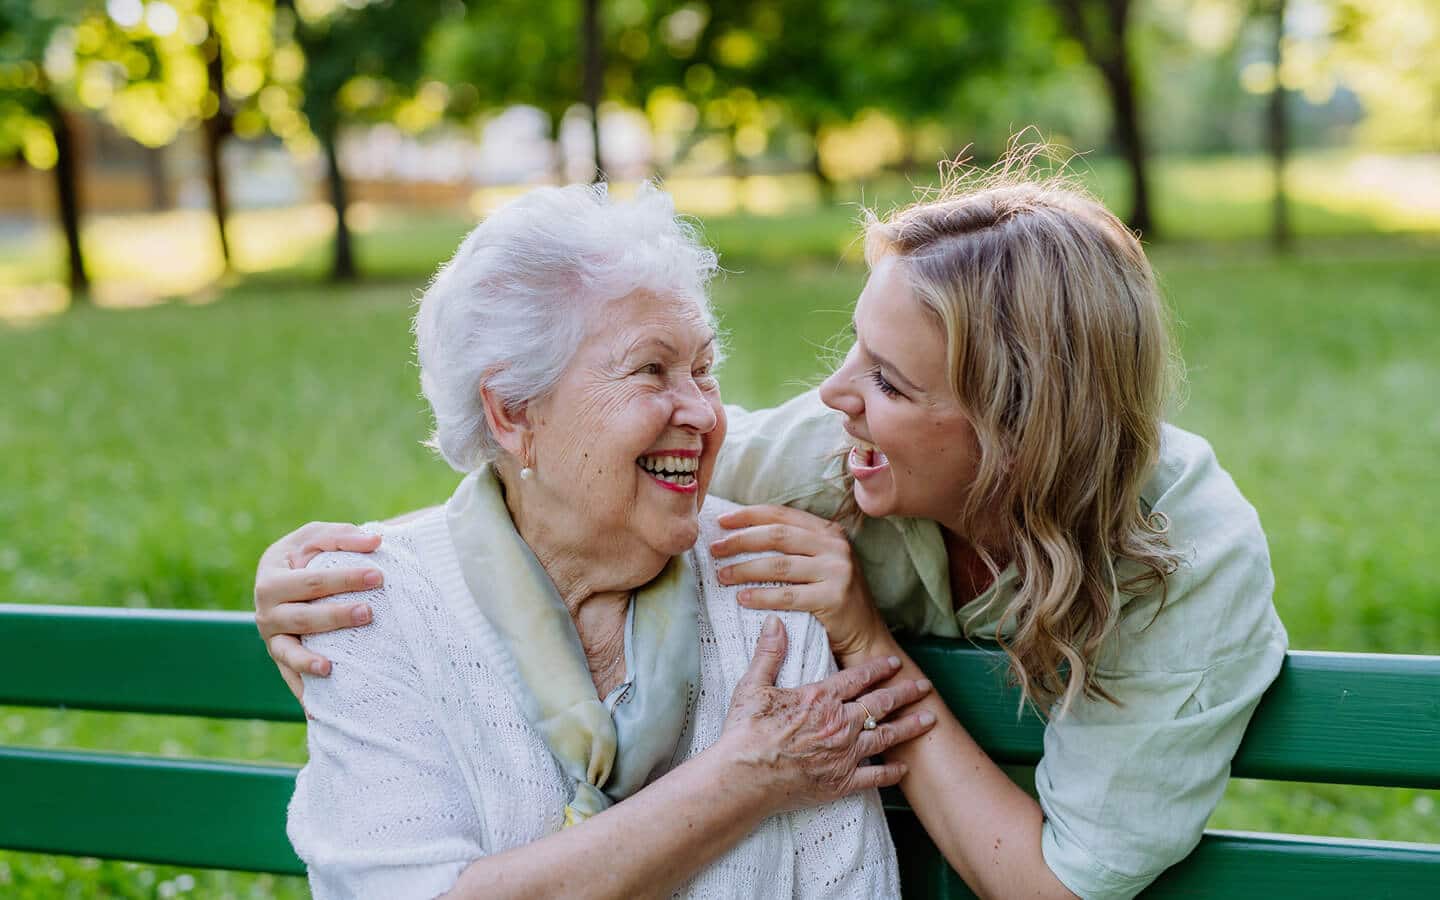 young woman embracing an older woman seated on a park bench